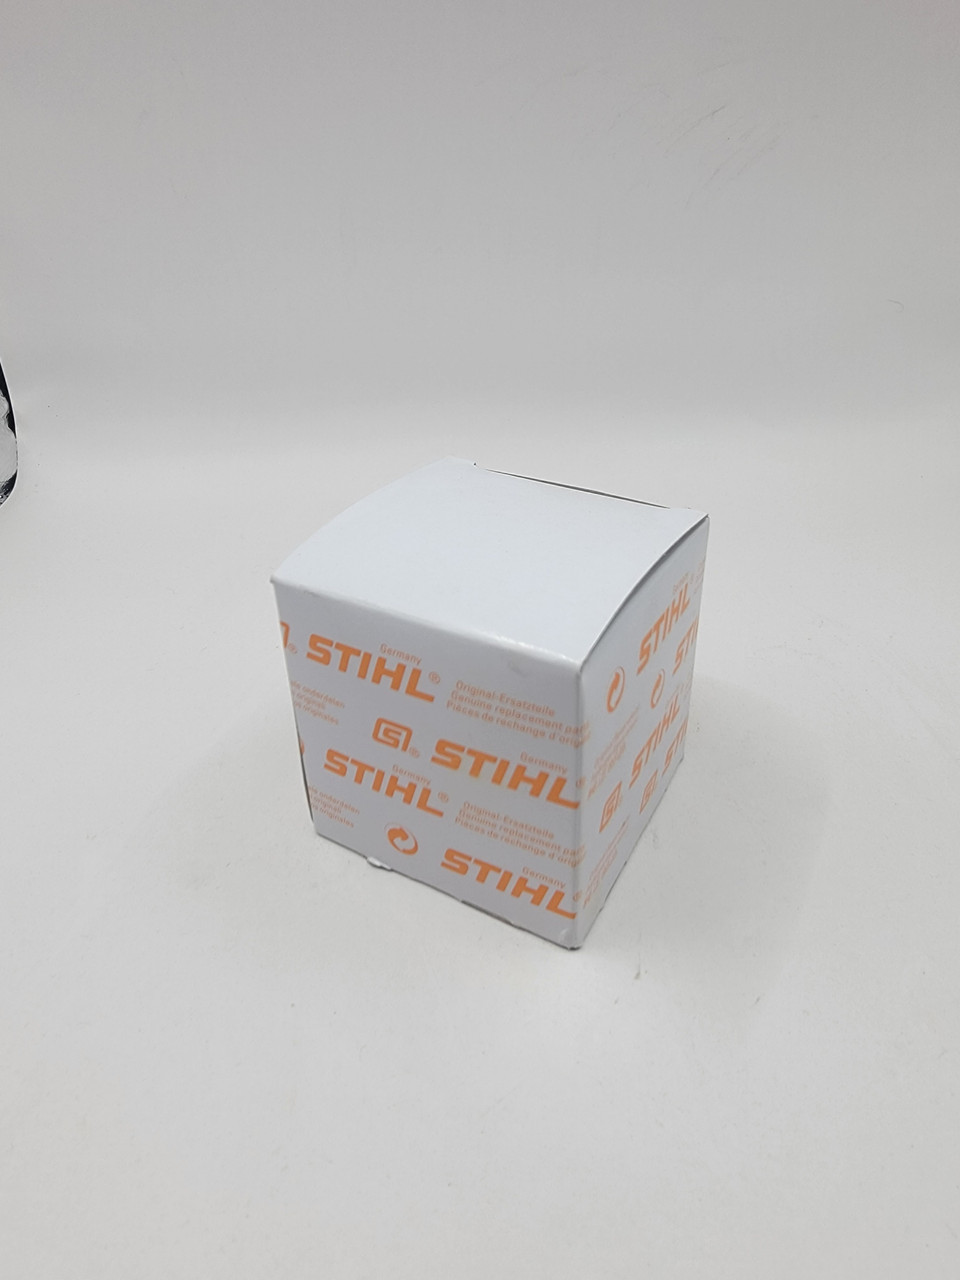 Stihl 0000 930 2804 HOSE 3.1x6.7x1000mm 1000MM one package